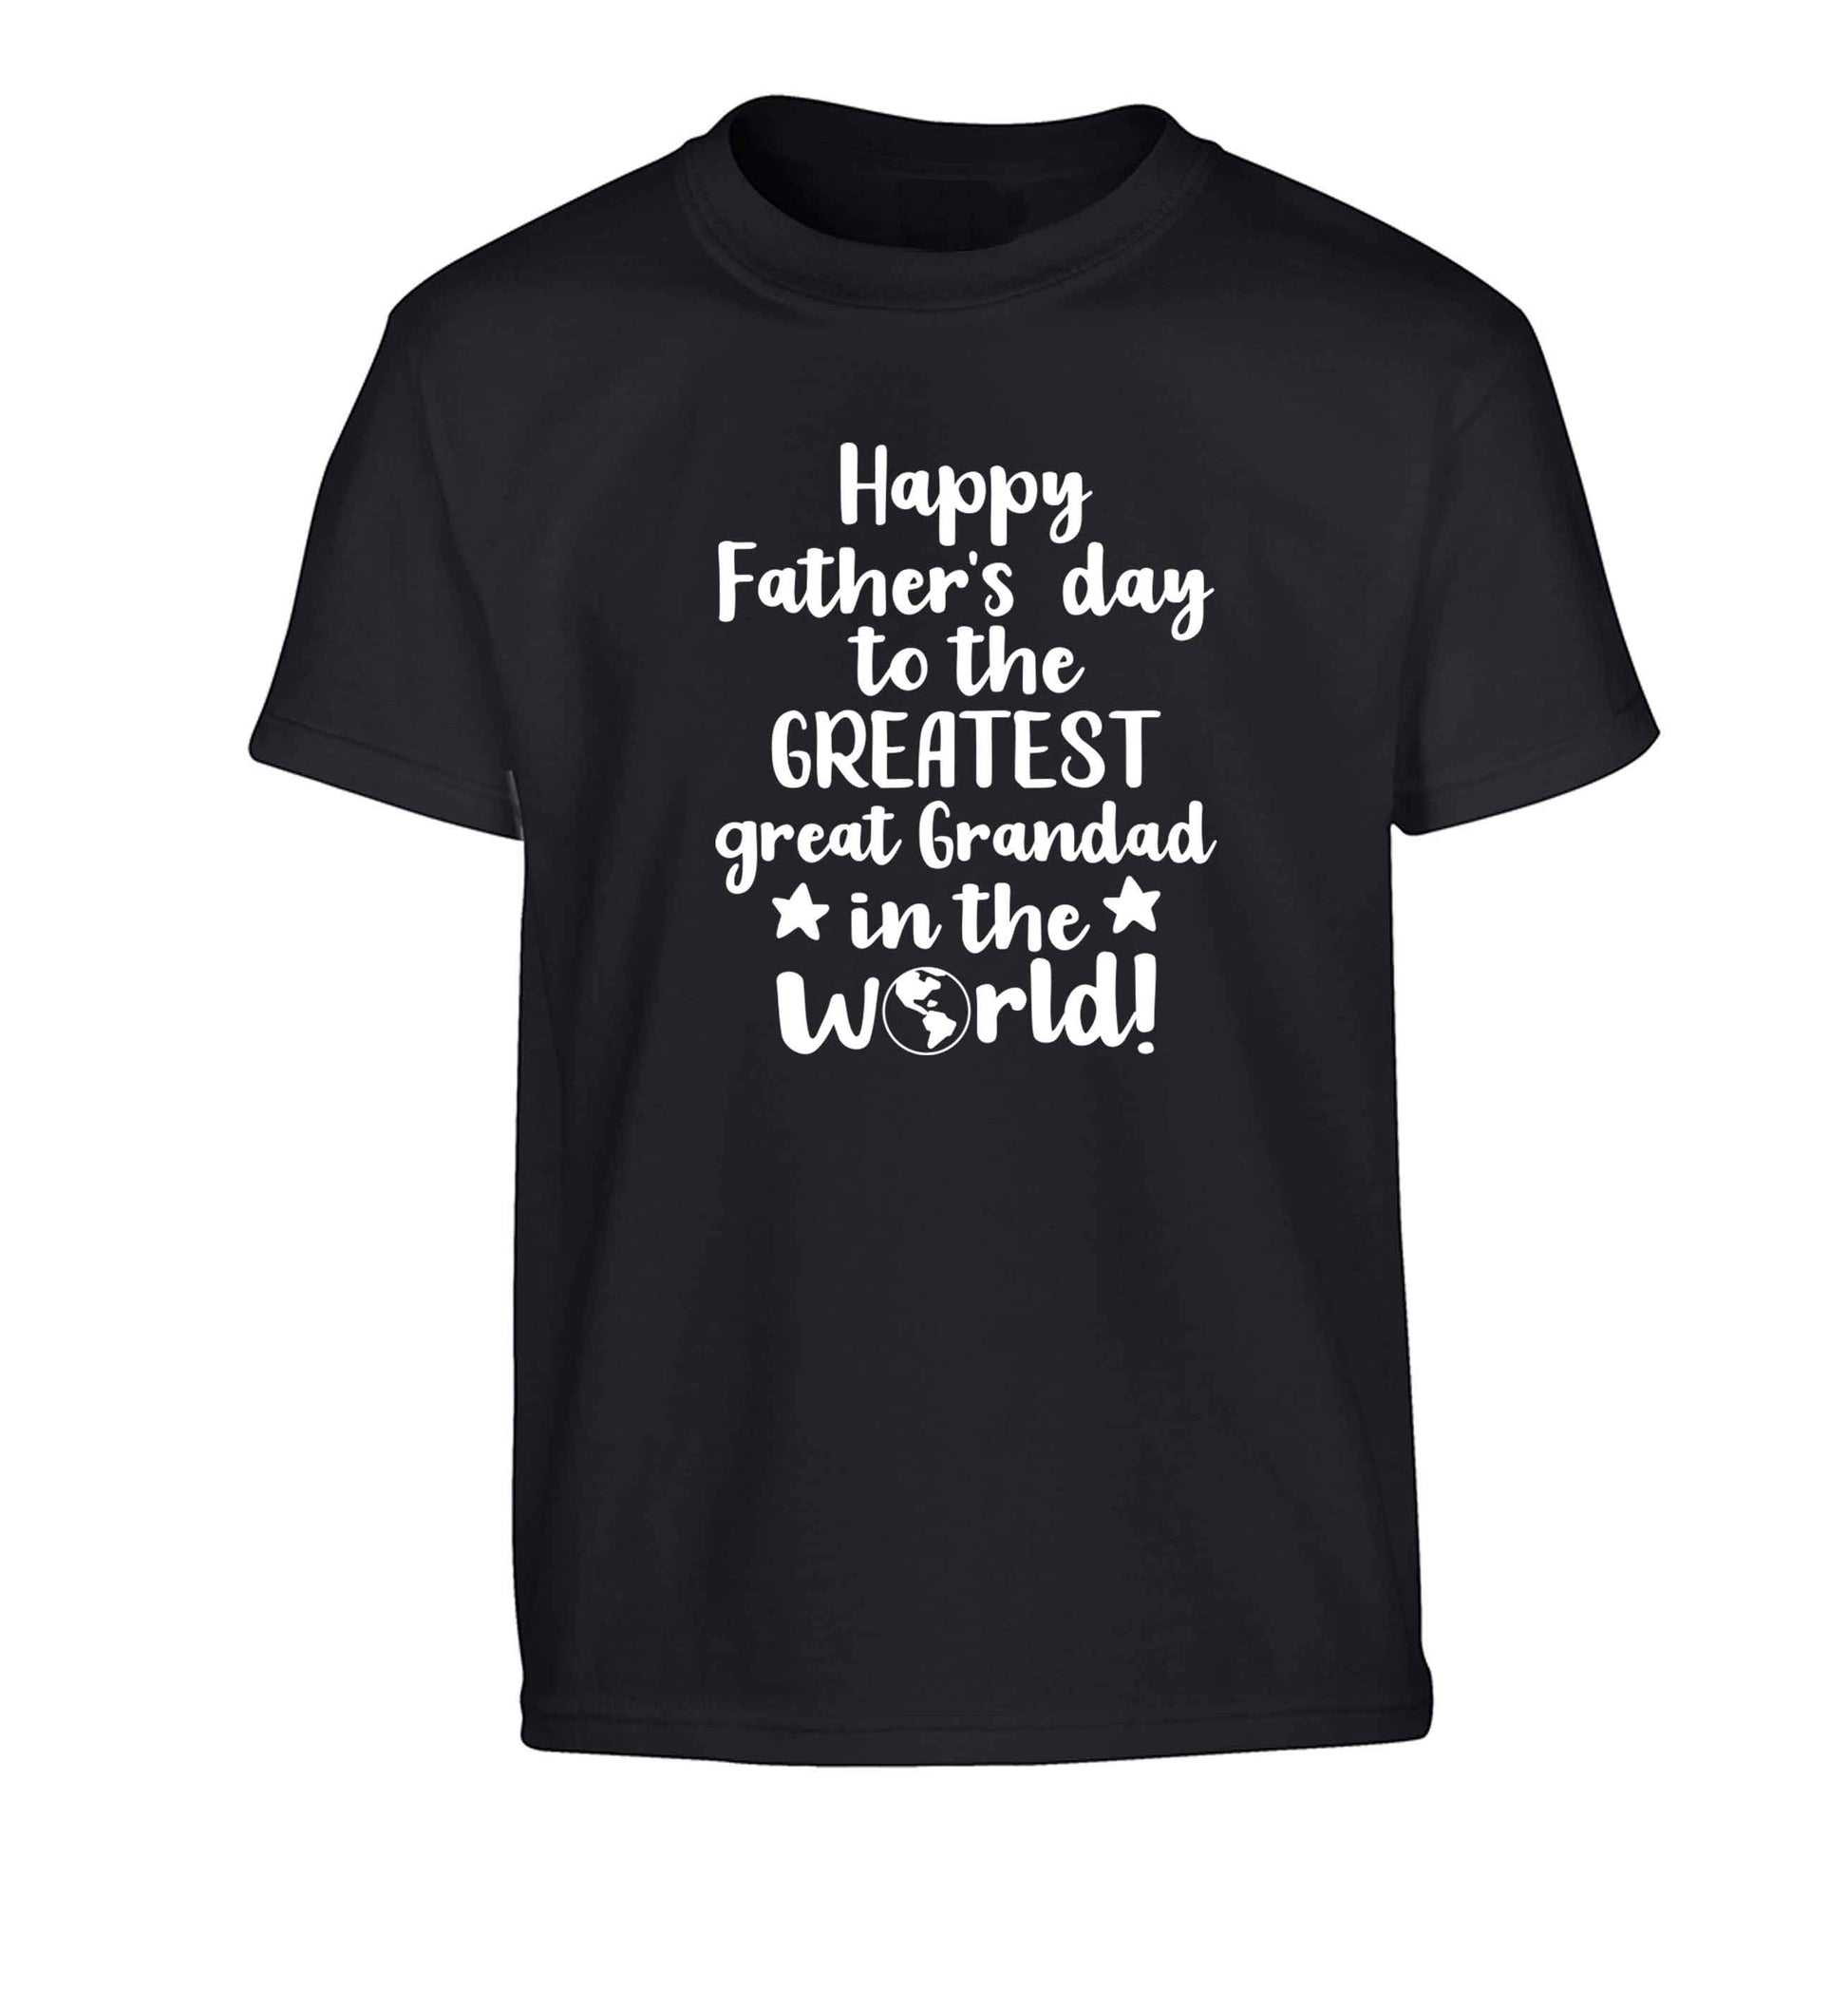 Happy Father's day to the greatest great grandad in the world Children's black Tshirt 12-13 Years